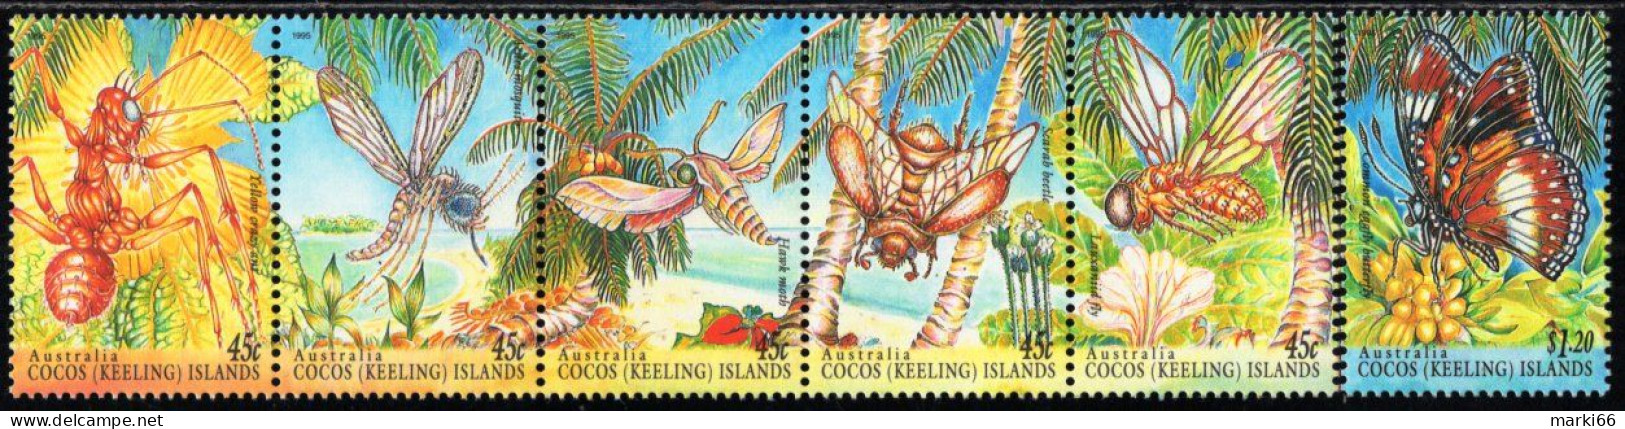 Cocos (Keeling) Islands - 1995 - Insects - Mint Stamp Set - Cocos (Keeling) Islands